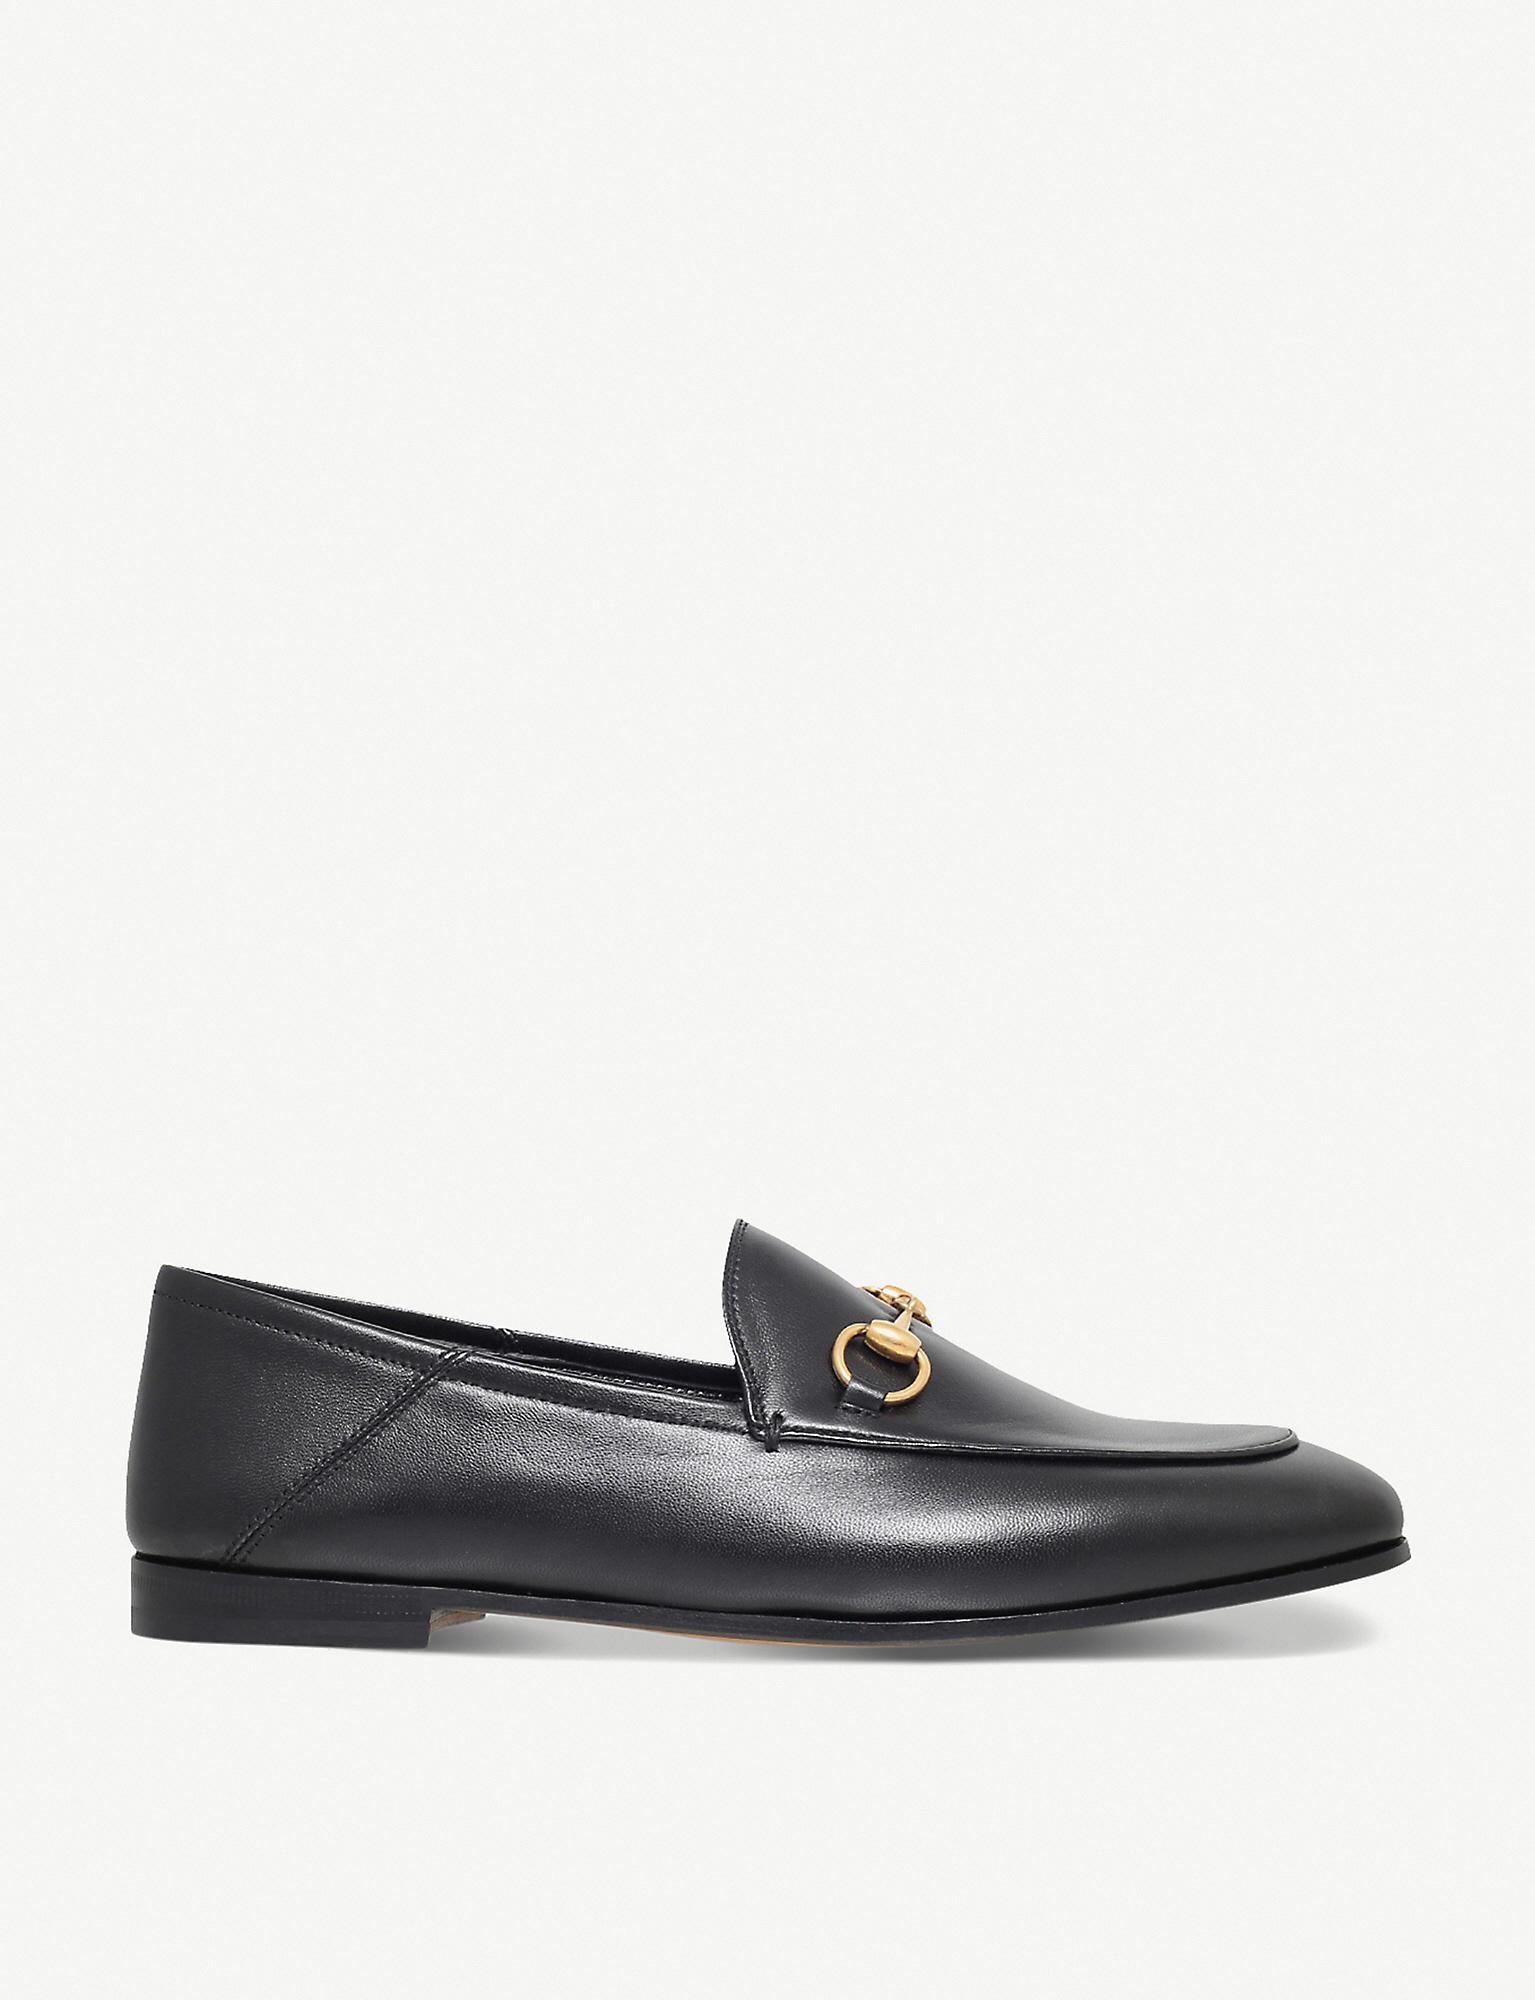 Gucci Brixton Leather Moccasins in Black - Save 12% - Lyst